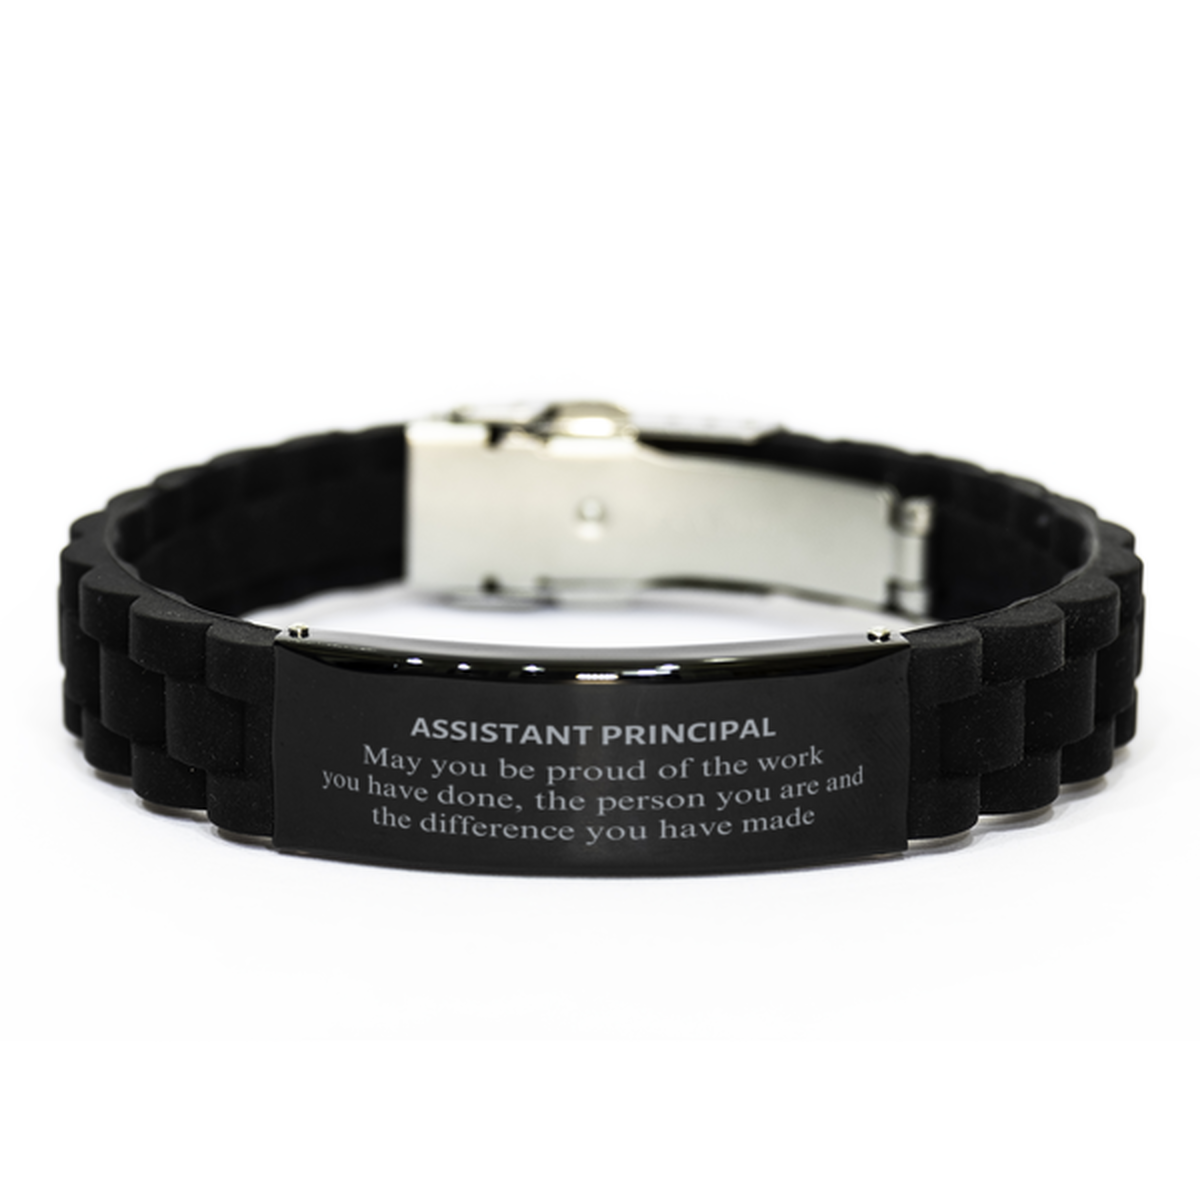 Assistant Principal May you be proud of the work you have done, Retirement Assistant Principal Black Glidelock Clasp Bracelet for Colleague Appreciation Gifts Amazing for Assistant Principal